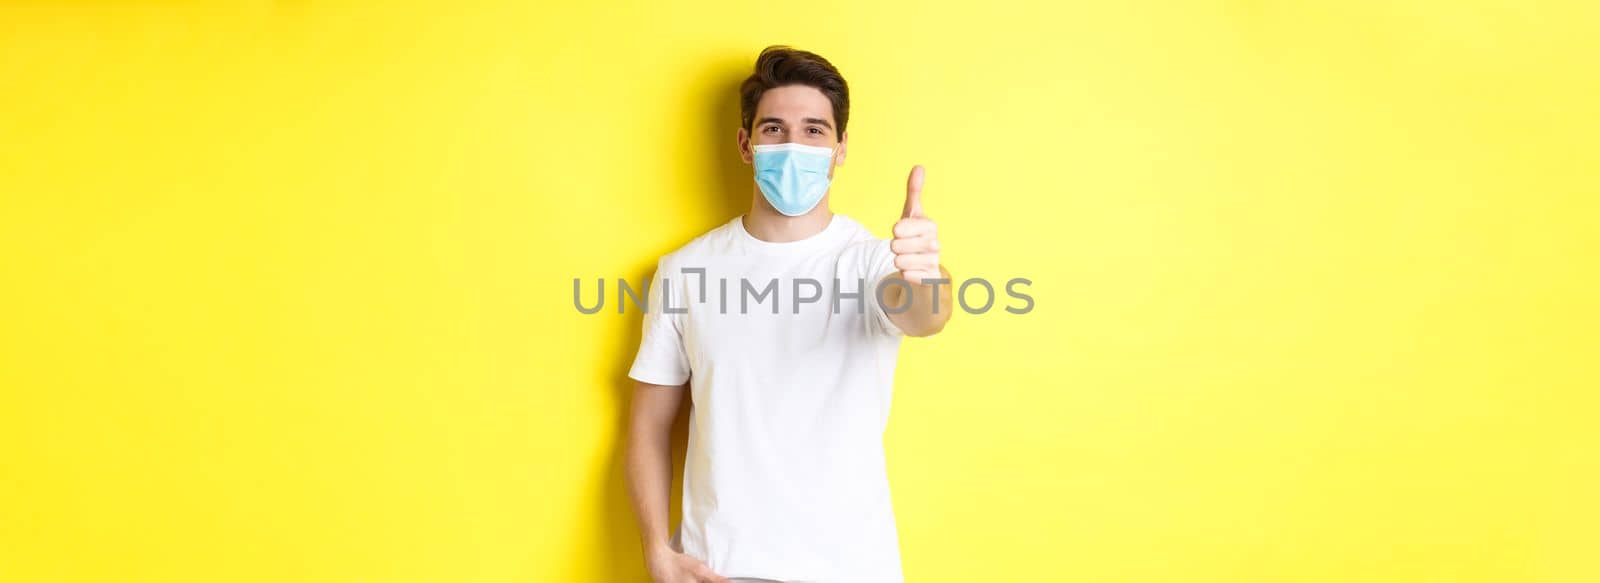 Concept of coronavirus, pandemic and social distancing. Confident young man in medical mask showing thumbs up, yellow background.